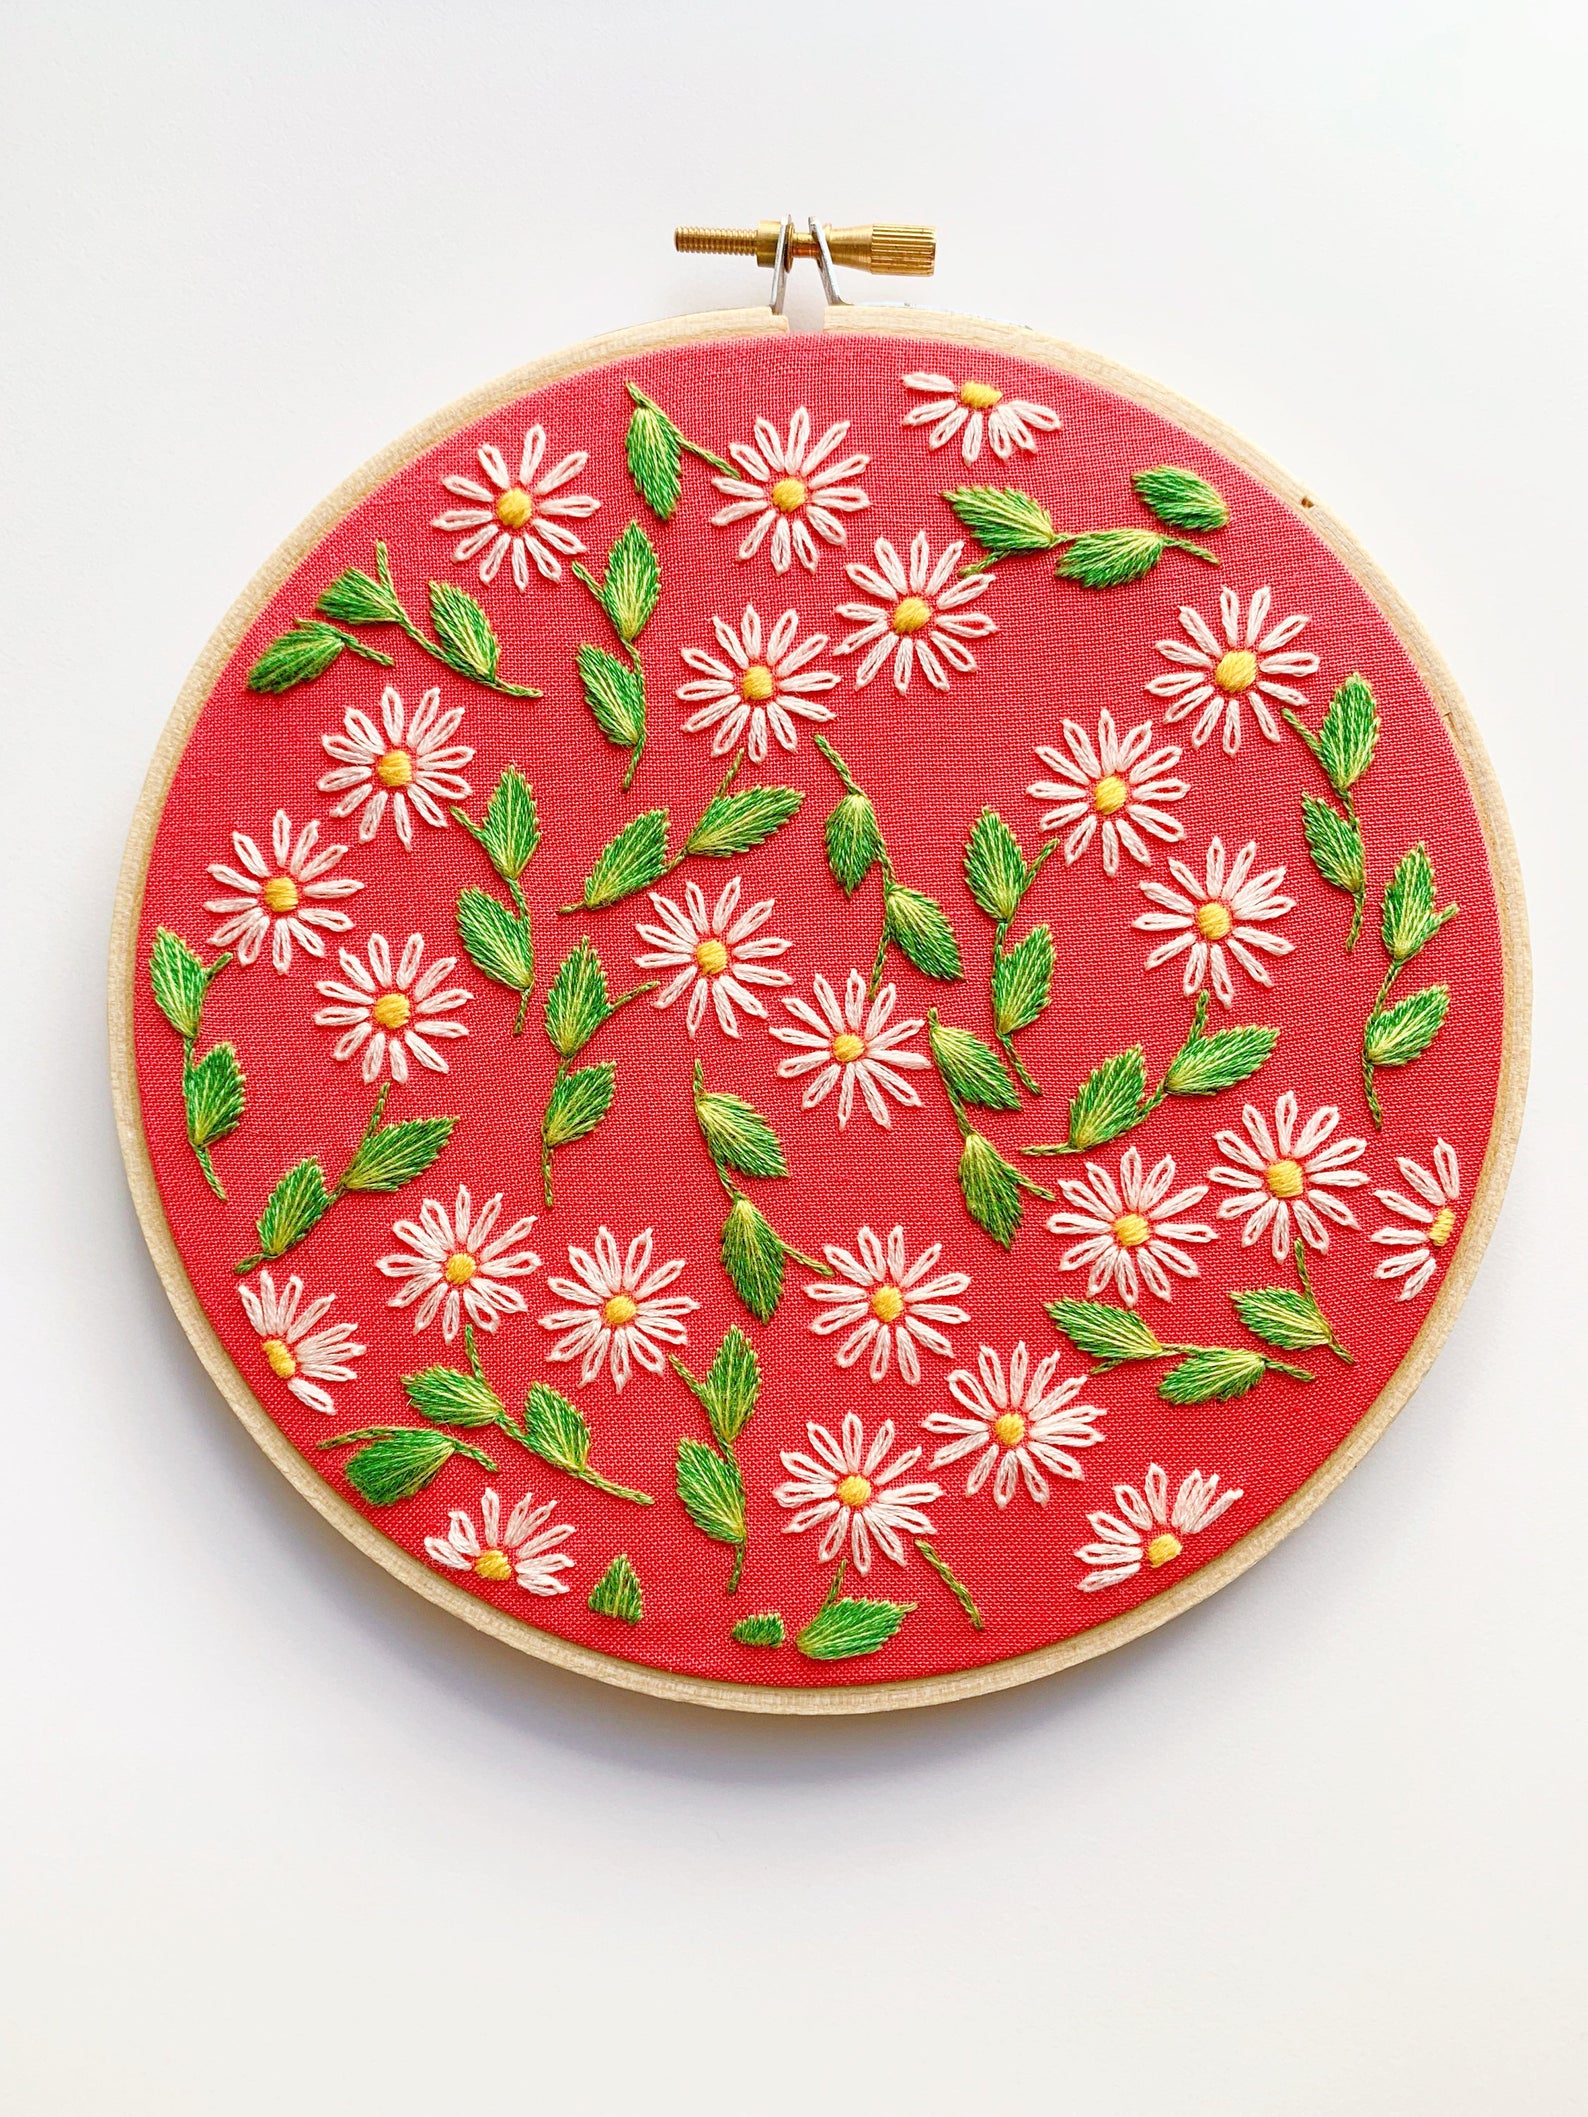 daisy hand embroidery pattern